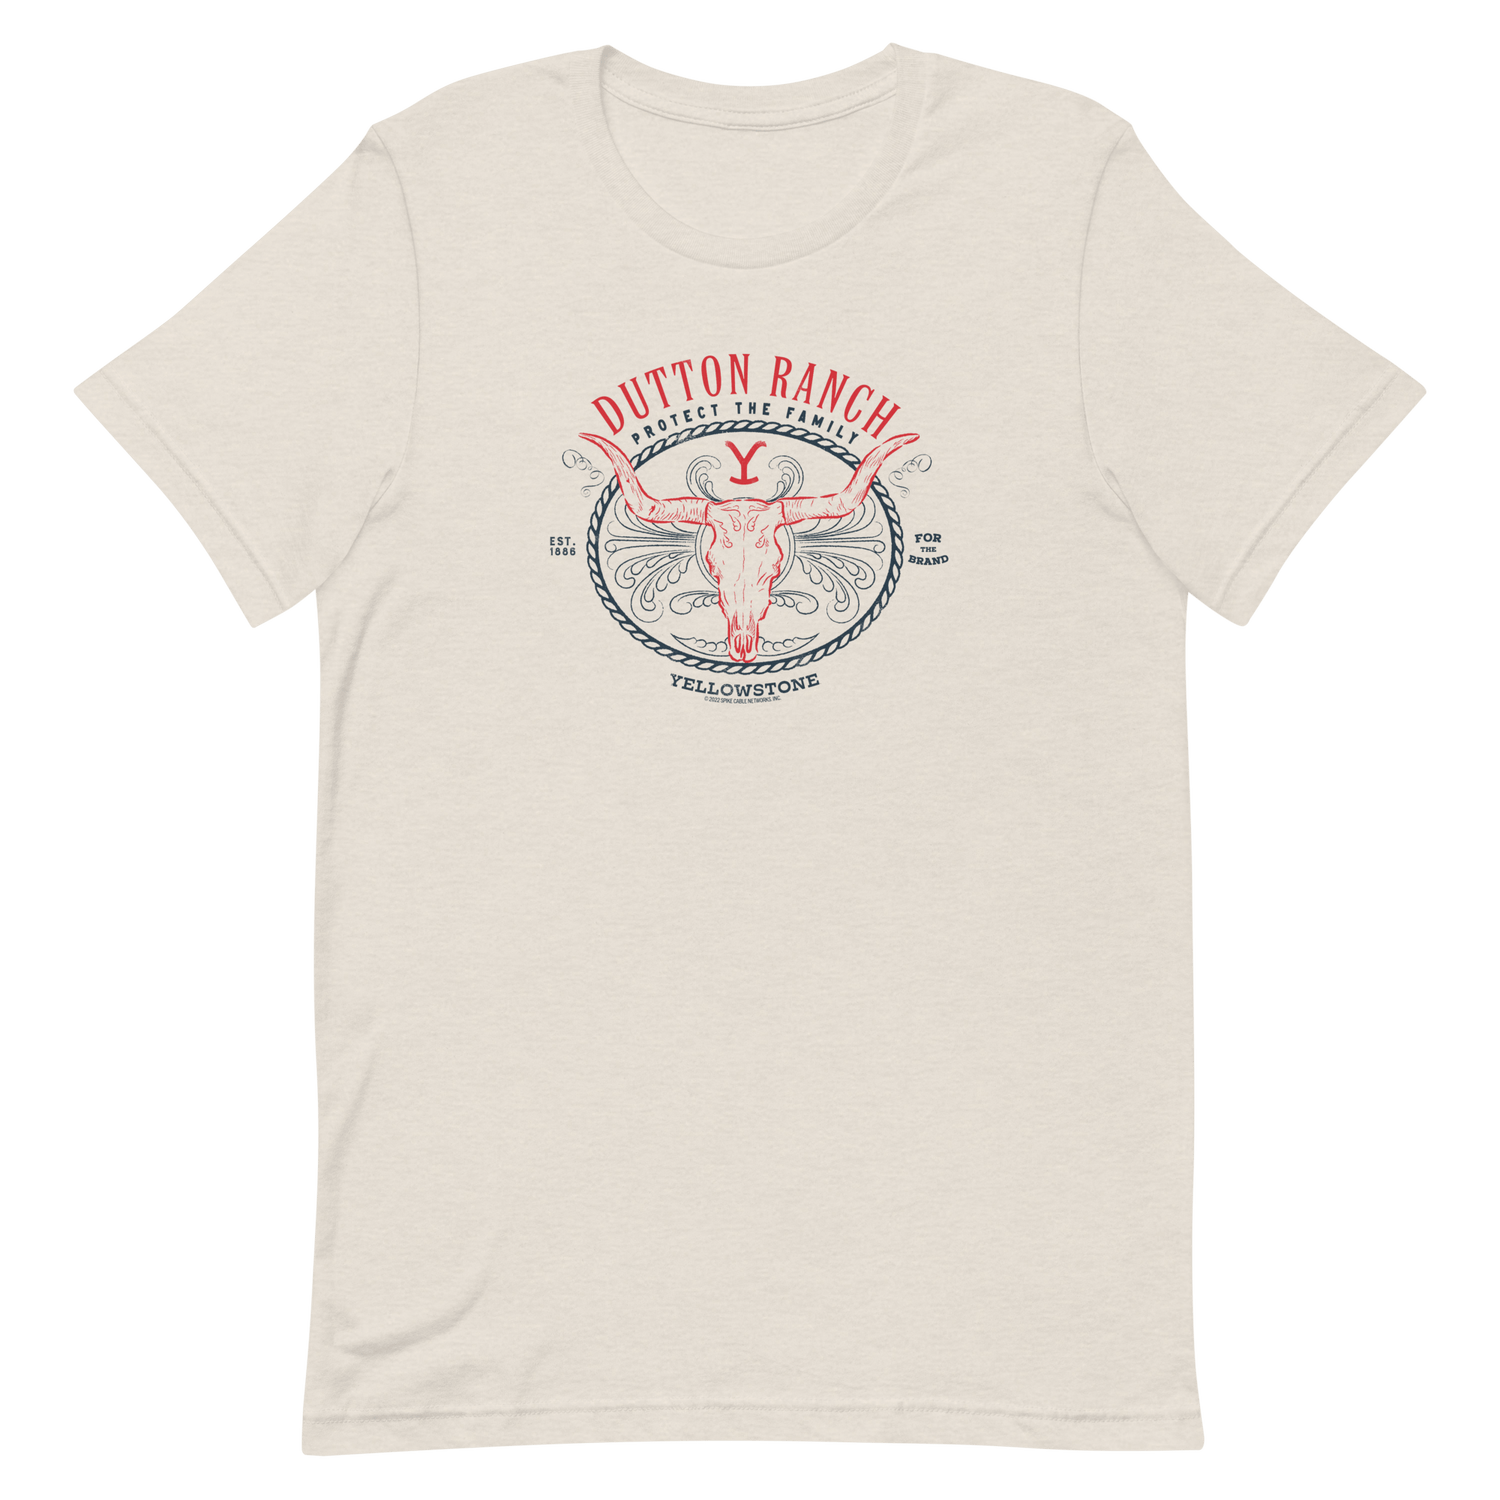 Yellowstone Dutton Ranch Protect the Family Adult T - Shirt - Paramount Shop